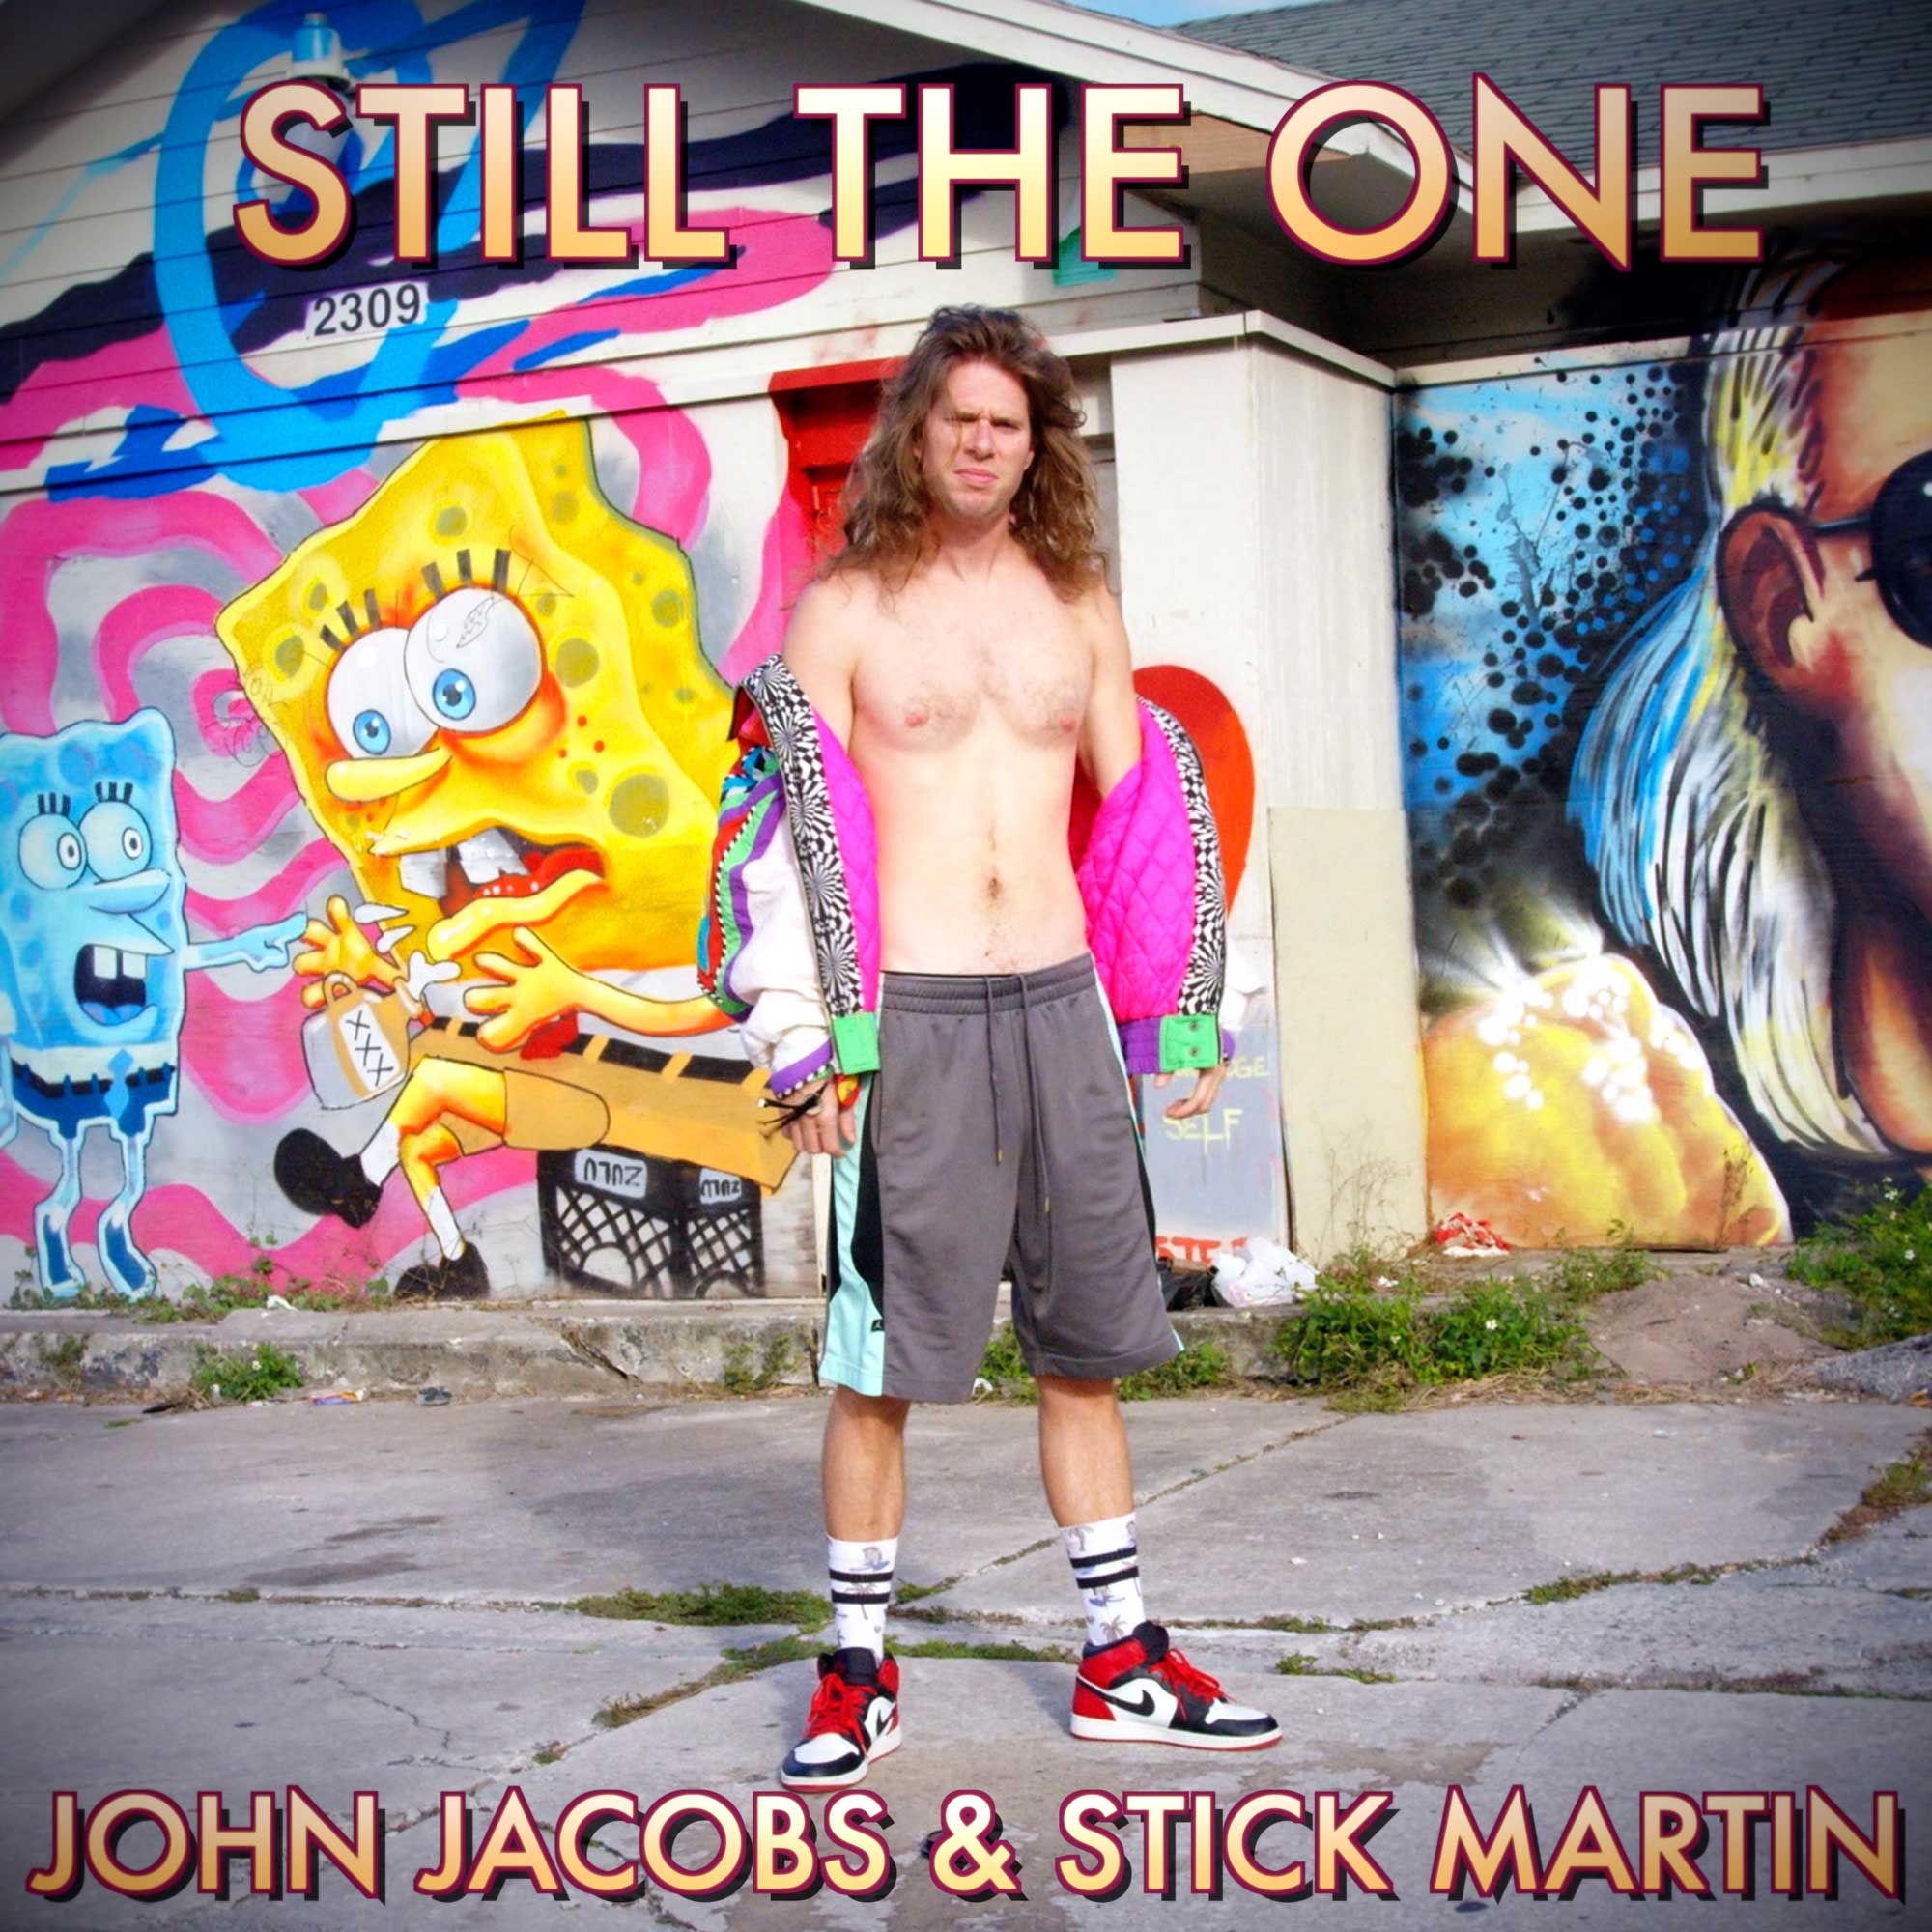 John Jacobs and Stick Martin - Still the One